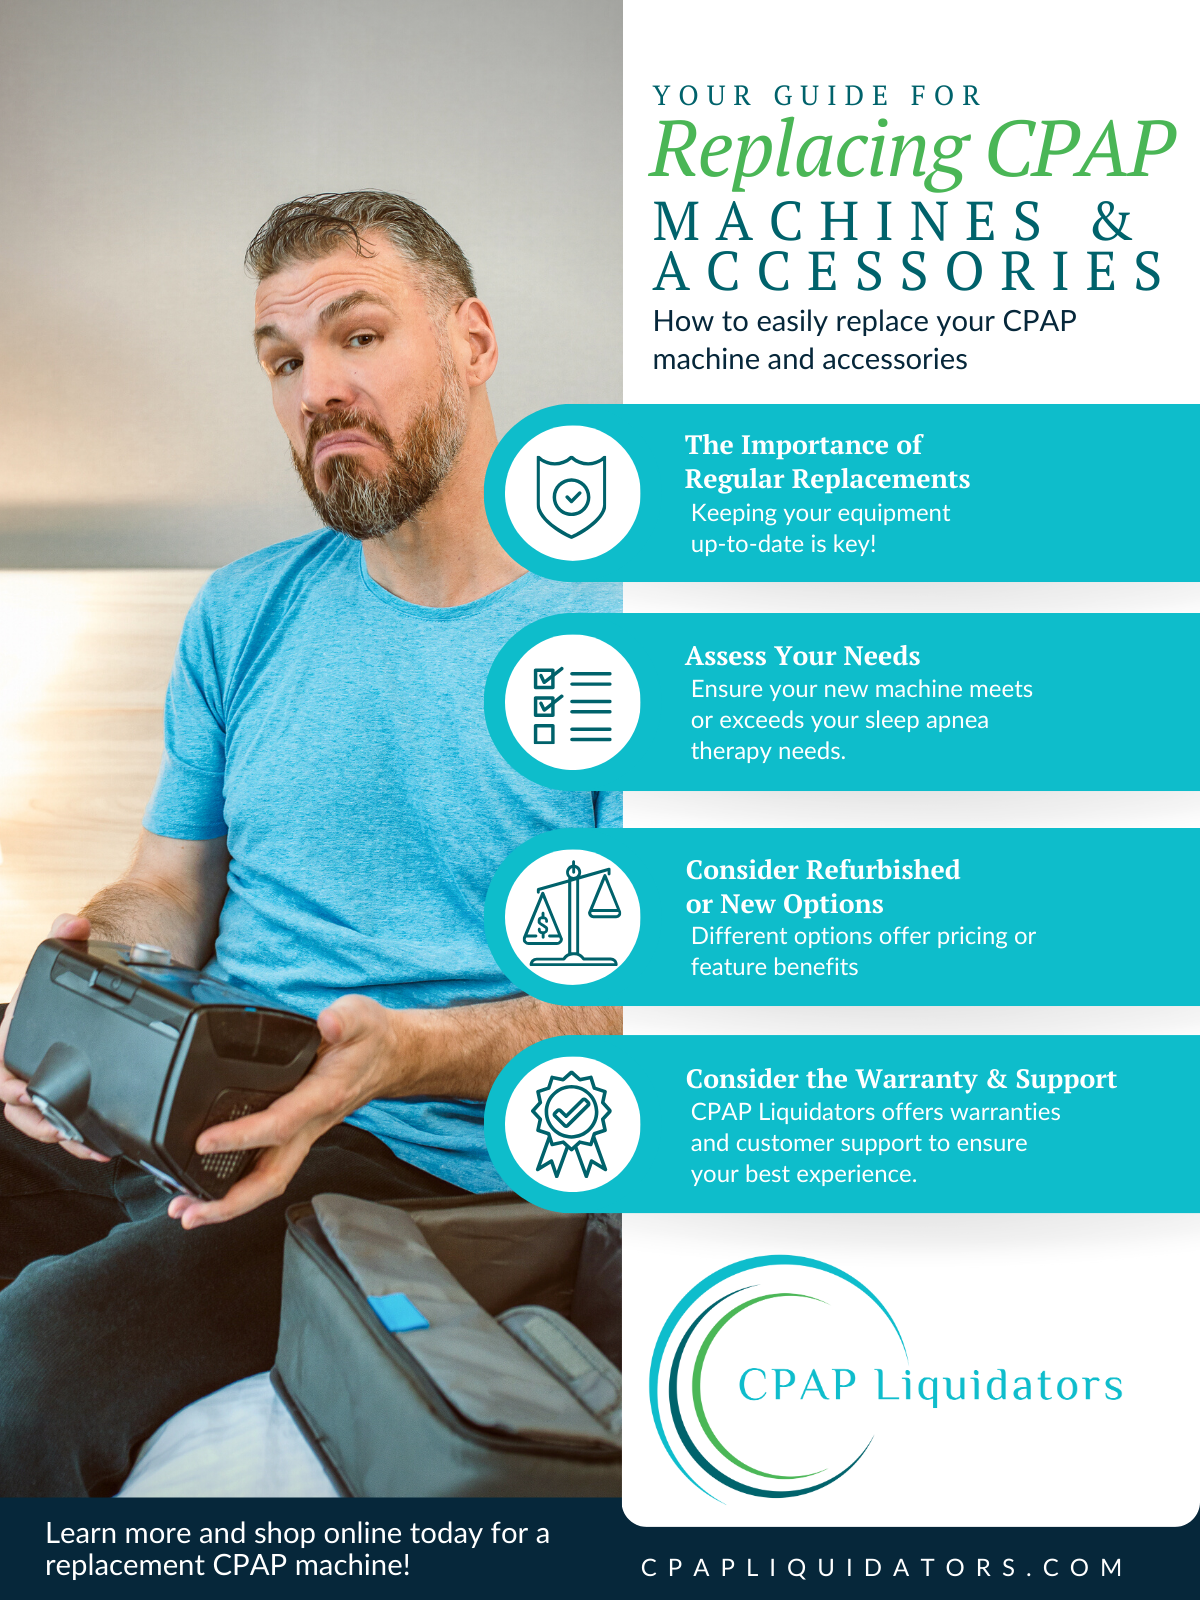 Your Guide for Replacing CPAP Machines & Accessories - Infographic